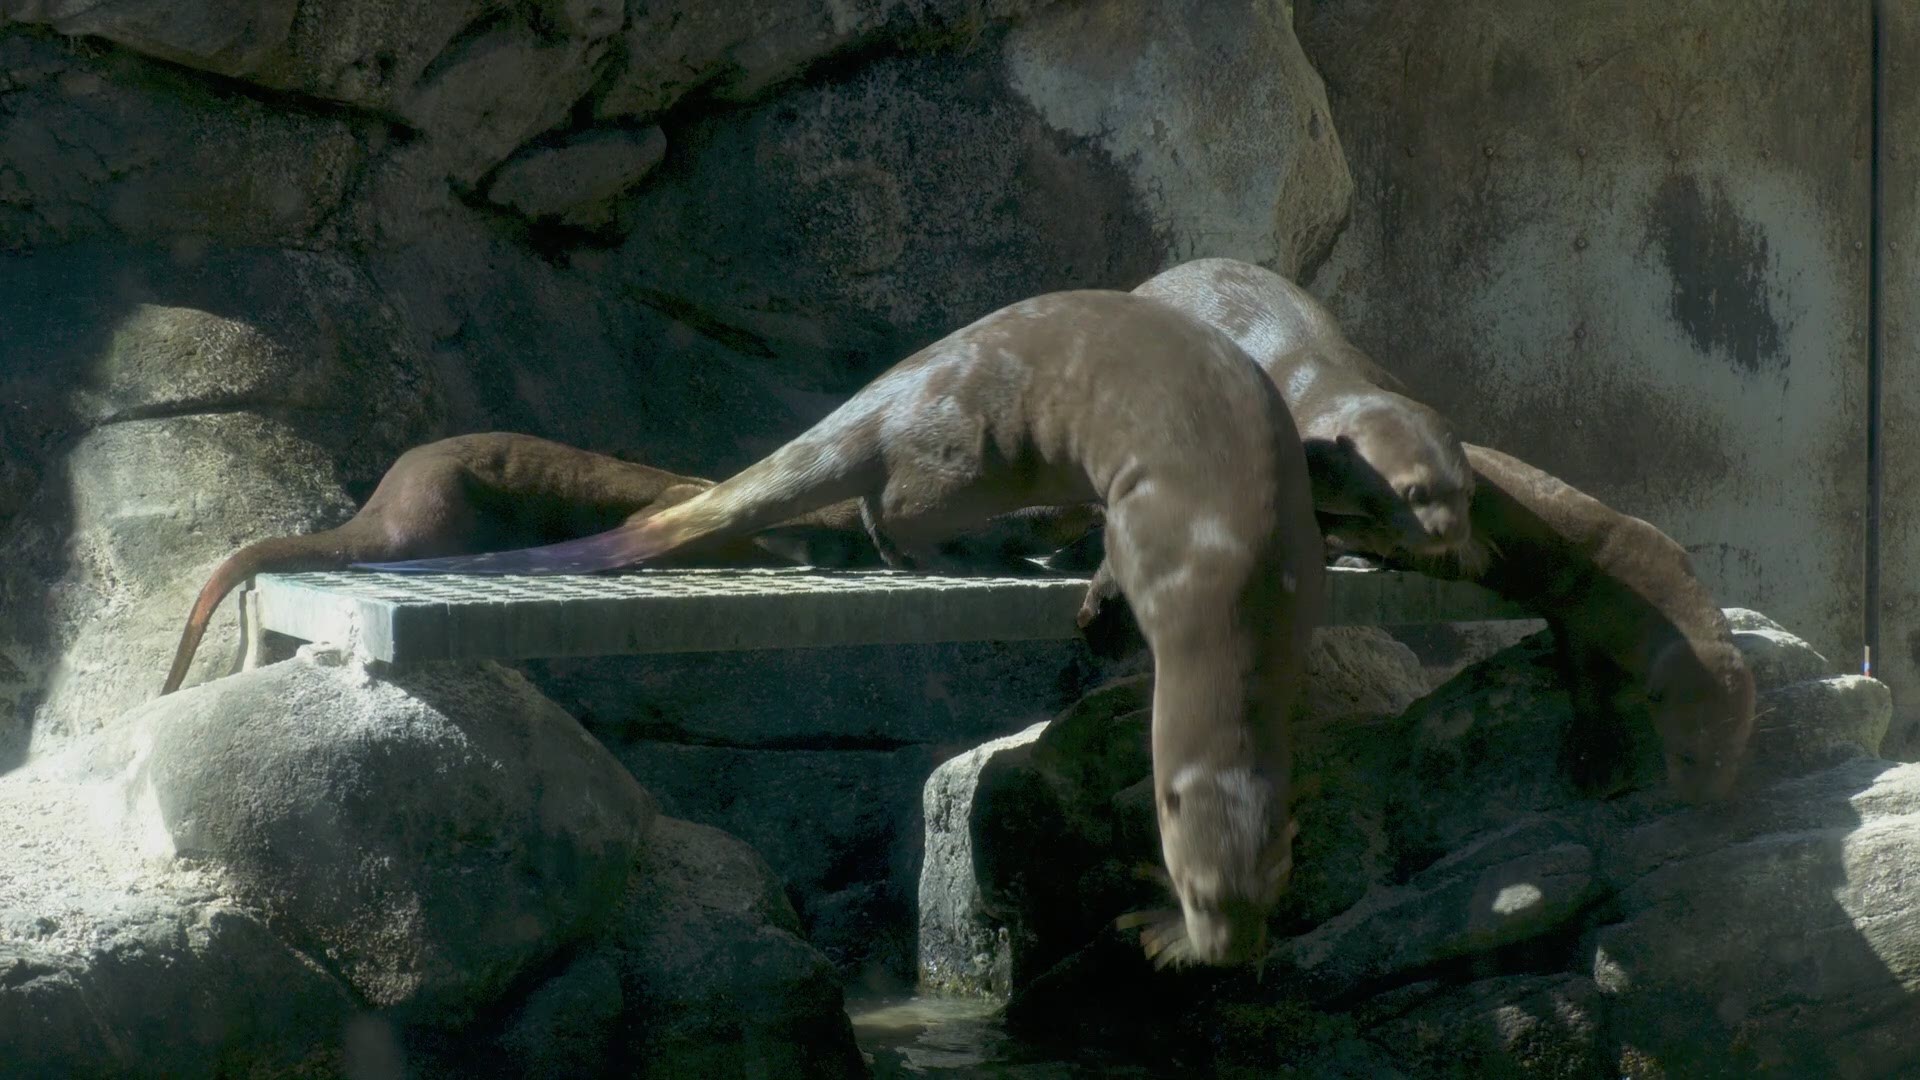 Three giant otter pups made their much-anticipated
public debut at Jacksonville Zoo and Gardens.